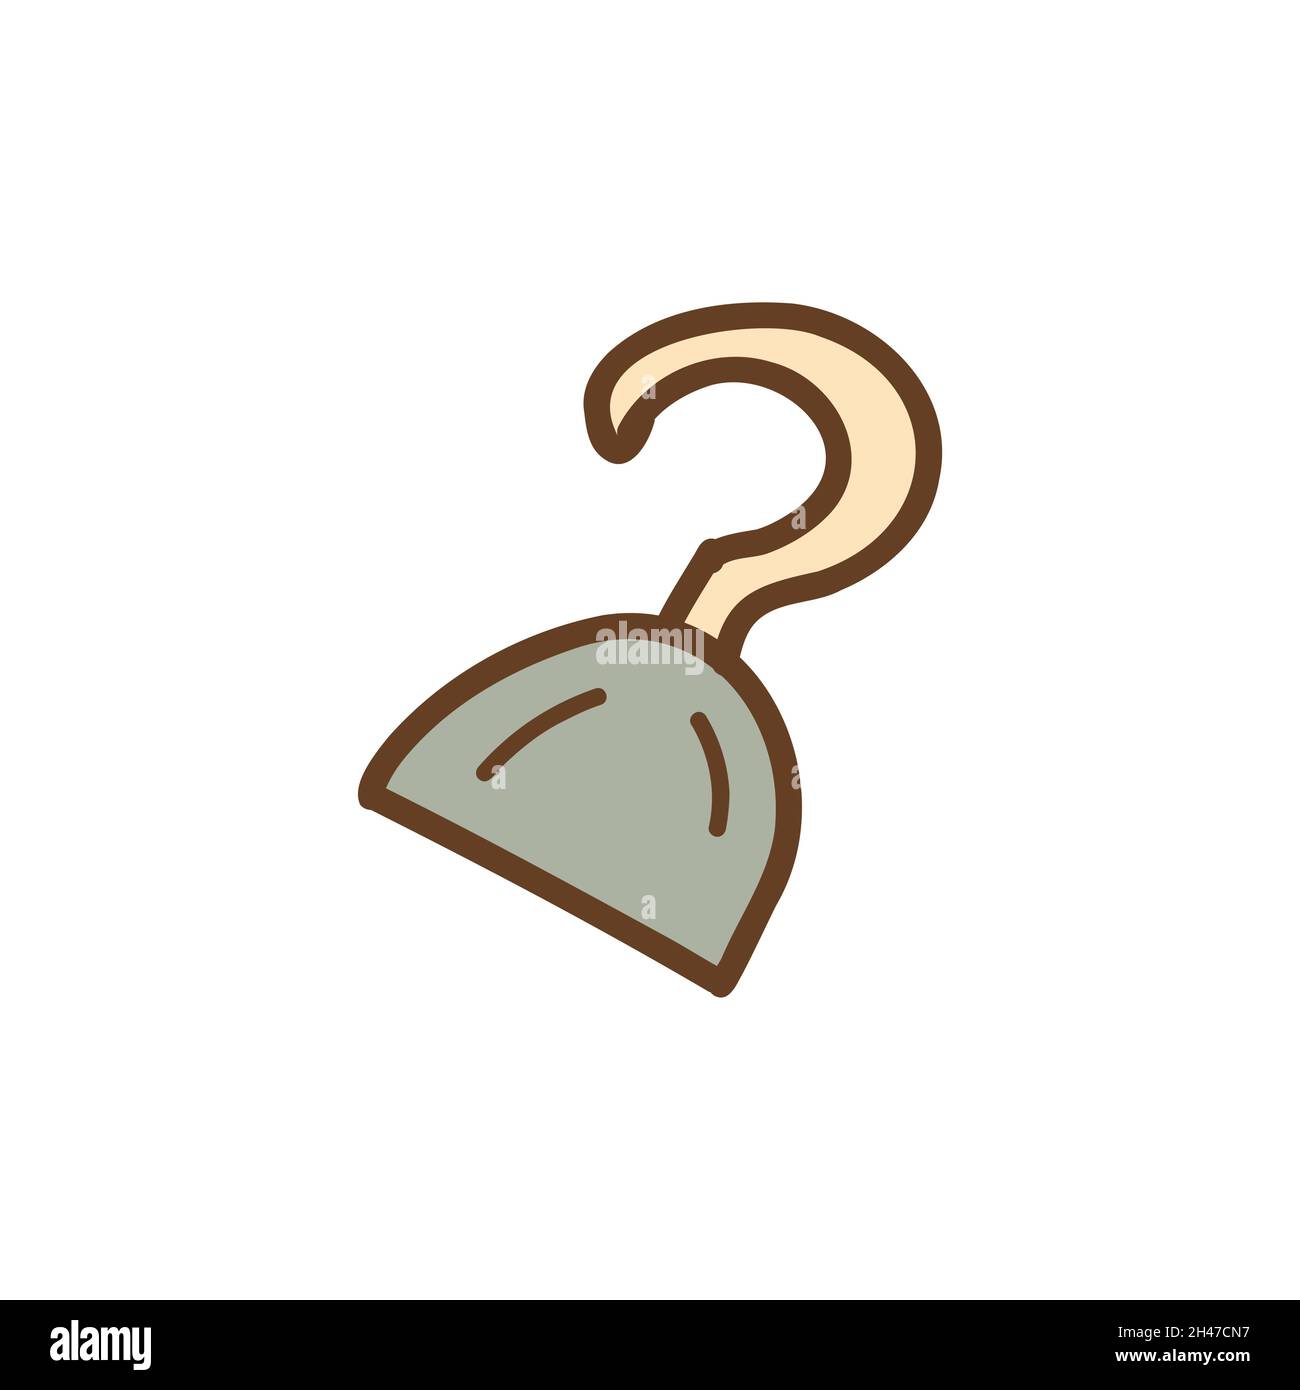 Pirate hook. Silver sharp prosthesis tool. Colorful vector